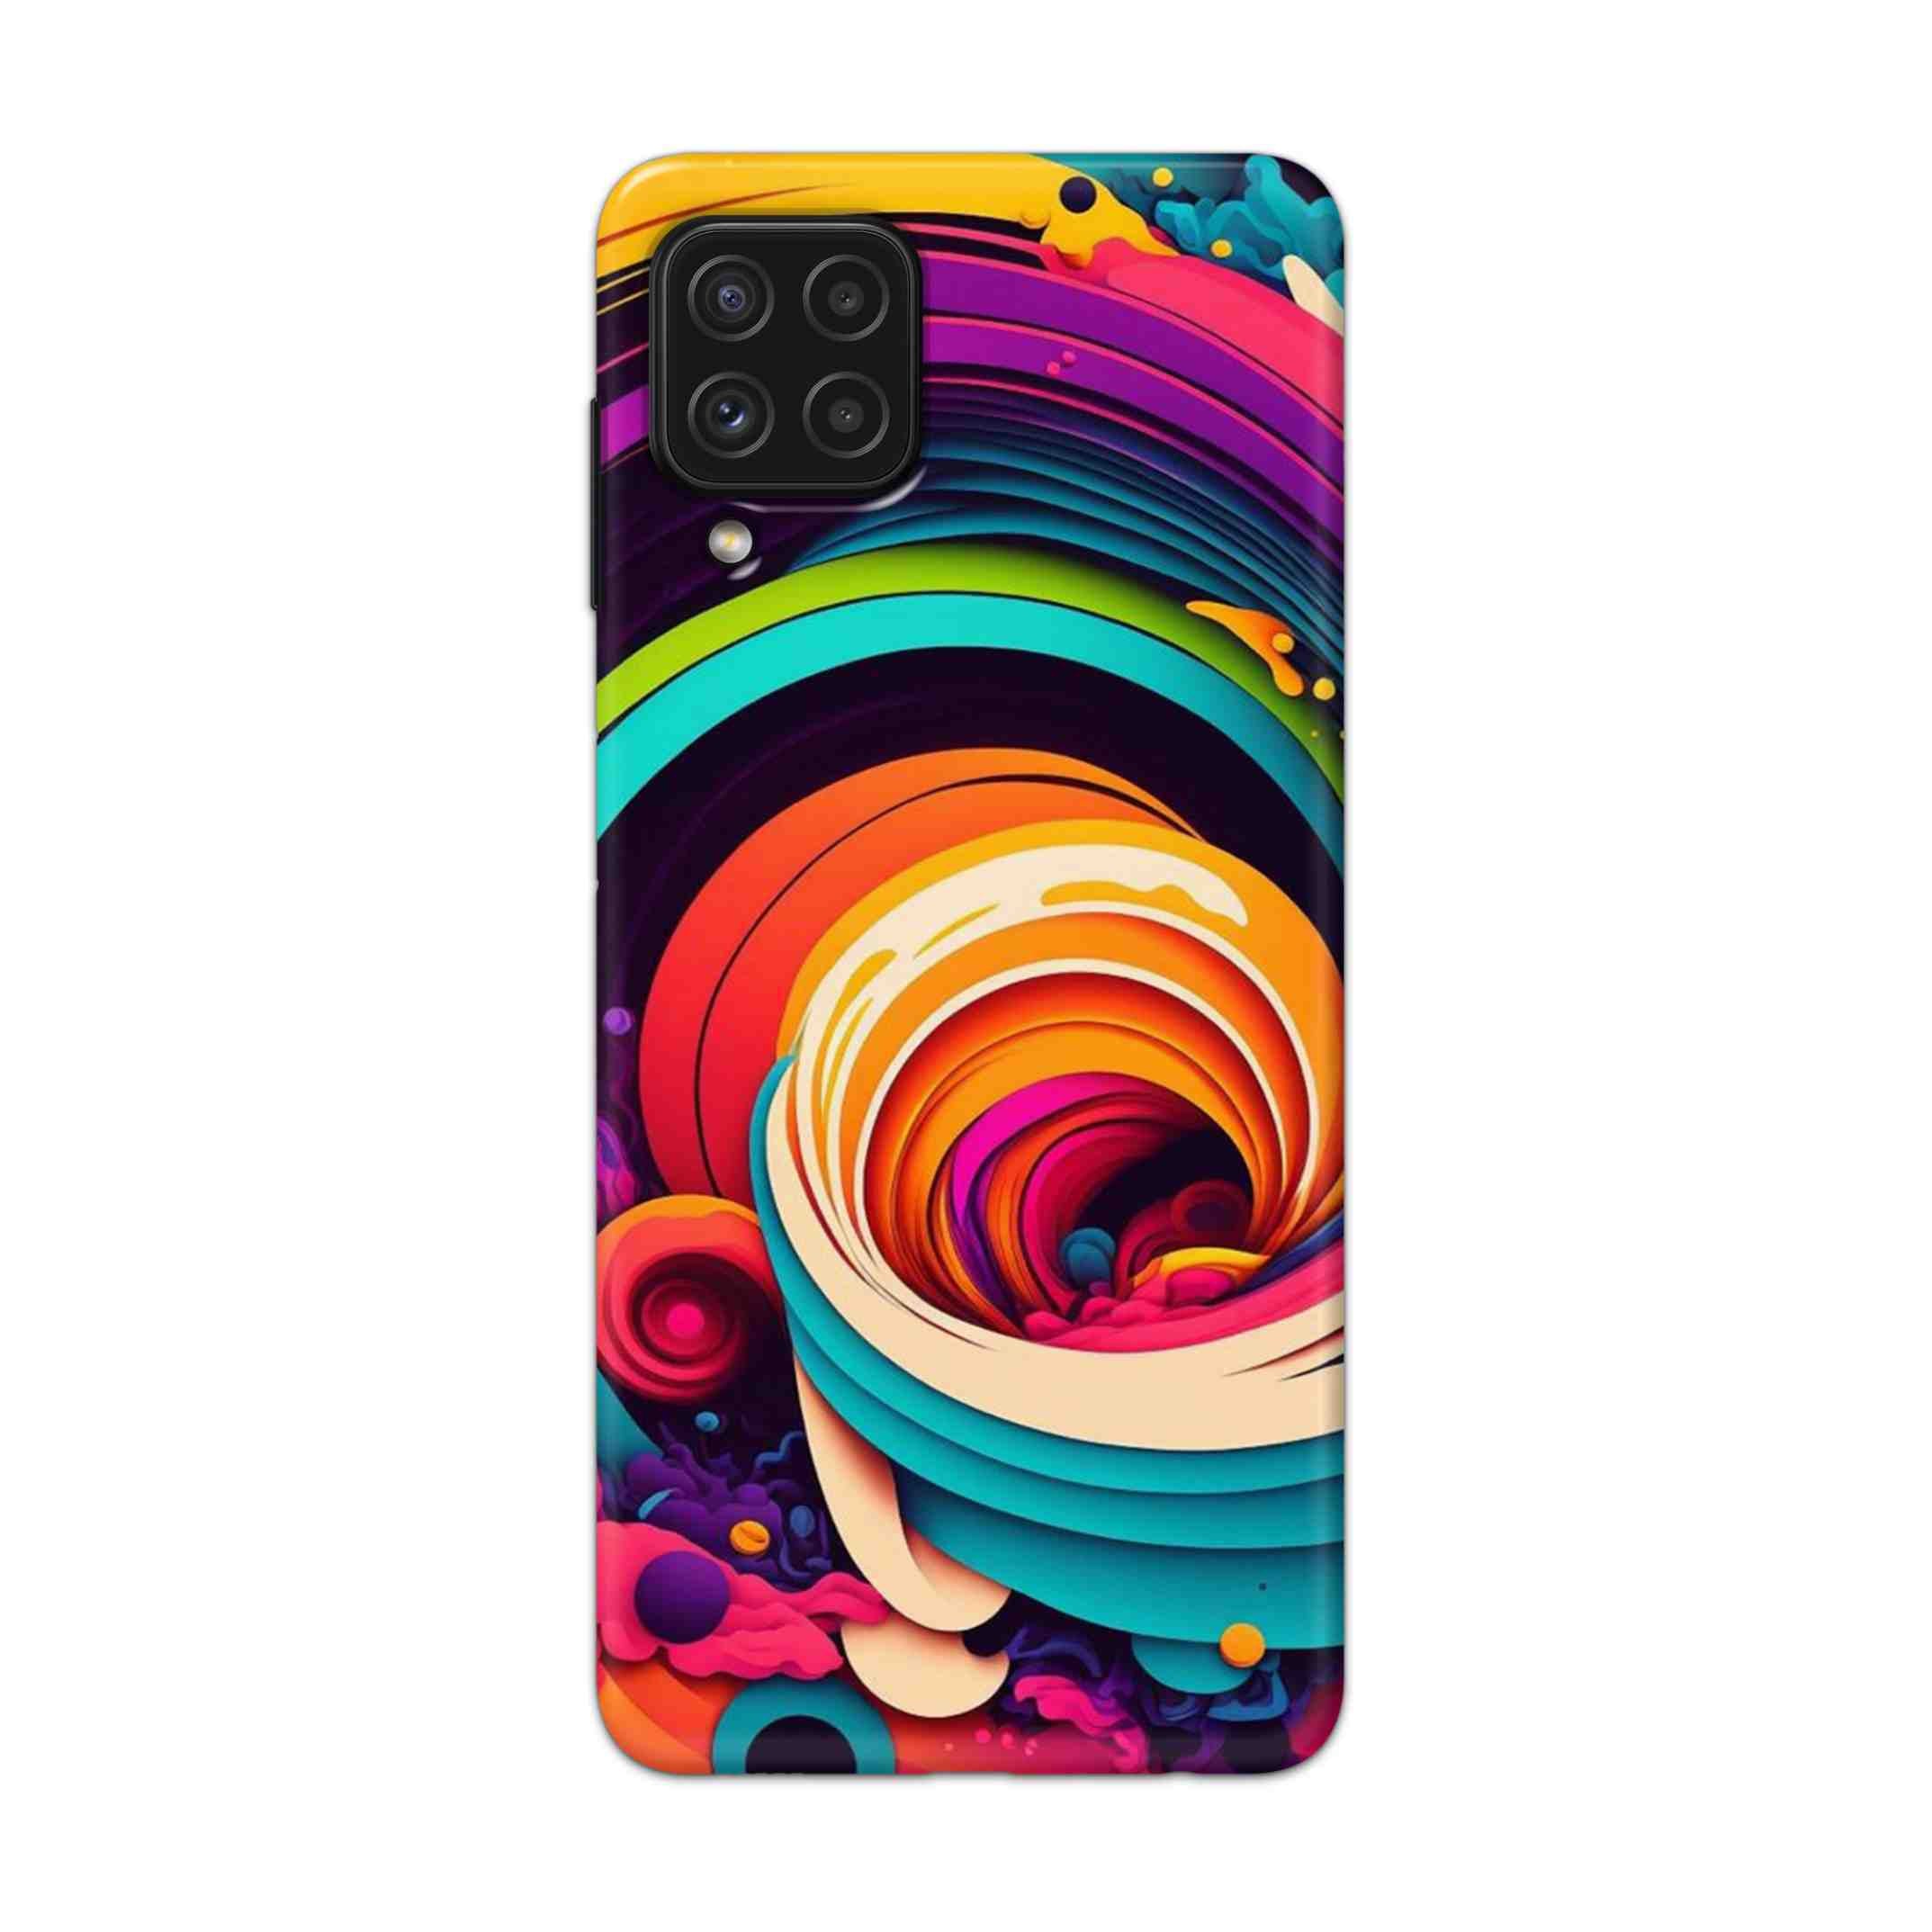 Buy Colour Circle Hard Back Mobile Phone Case Cover For Samsung Galaxy A22 Online